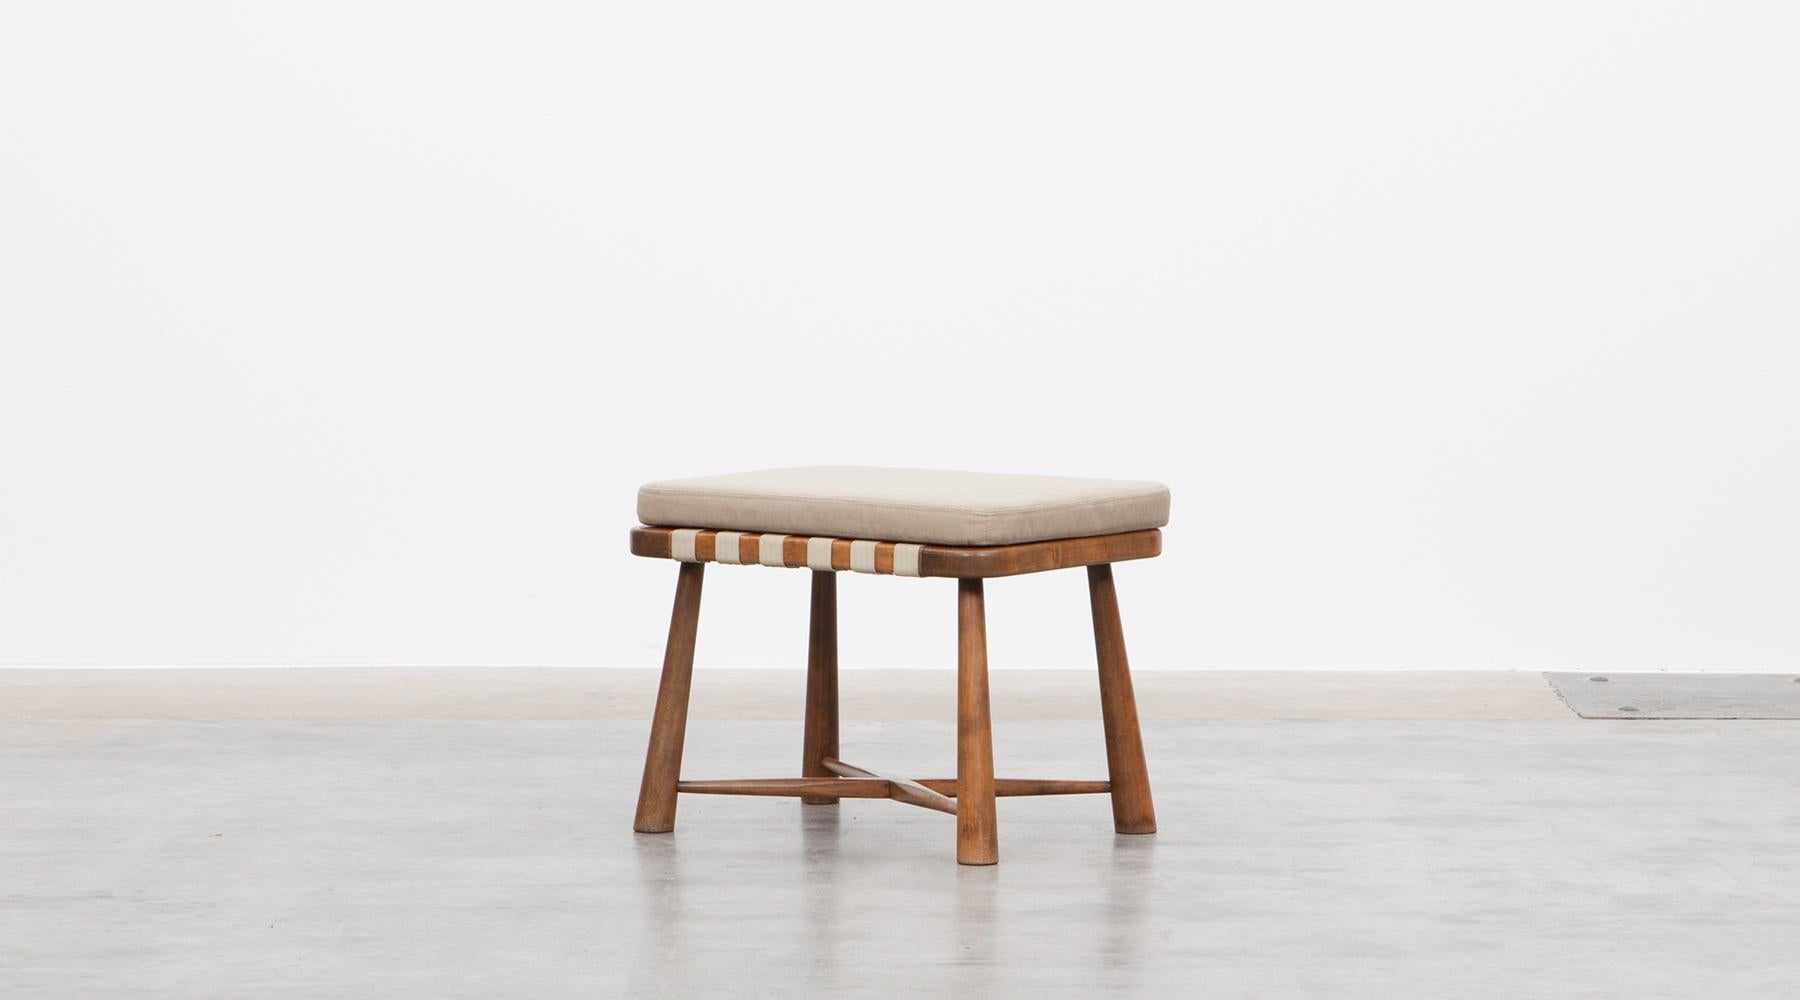 Stool, new upholstery in high-quality fabric, Sweden, 1940s.

A wonderful simple designed stool in wood, which shows character by its minimalism and simplicity. The stool is worked on the seat with textile stripes, on which lies a newly